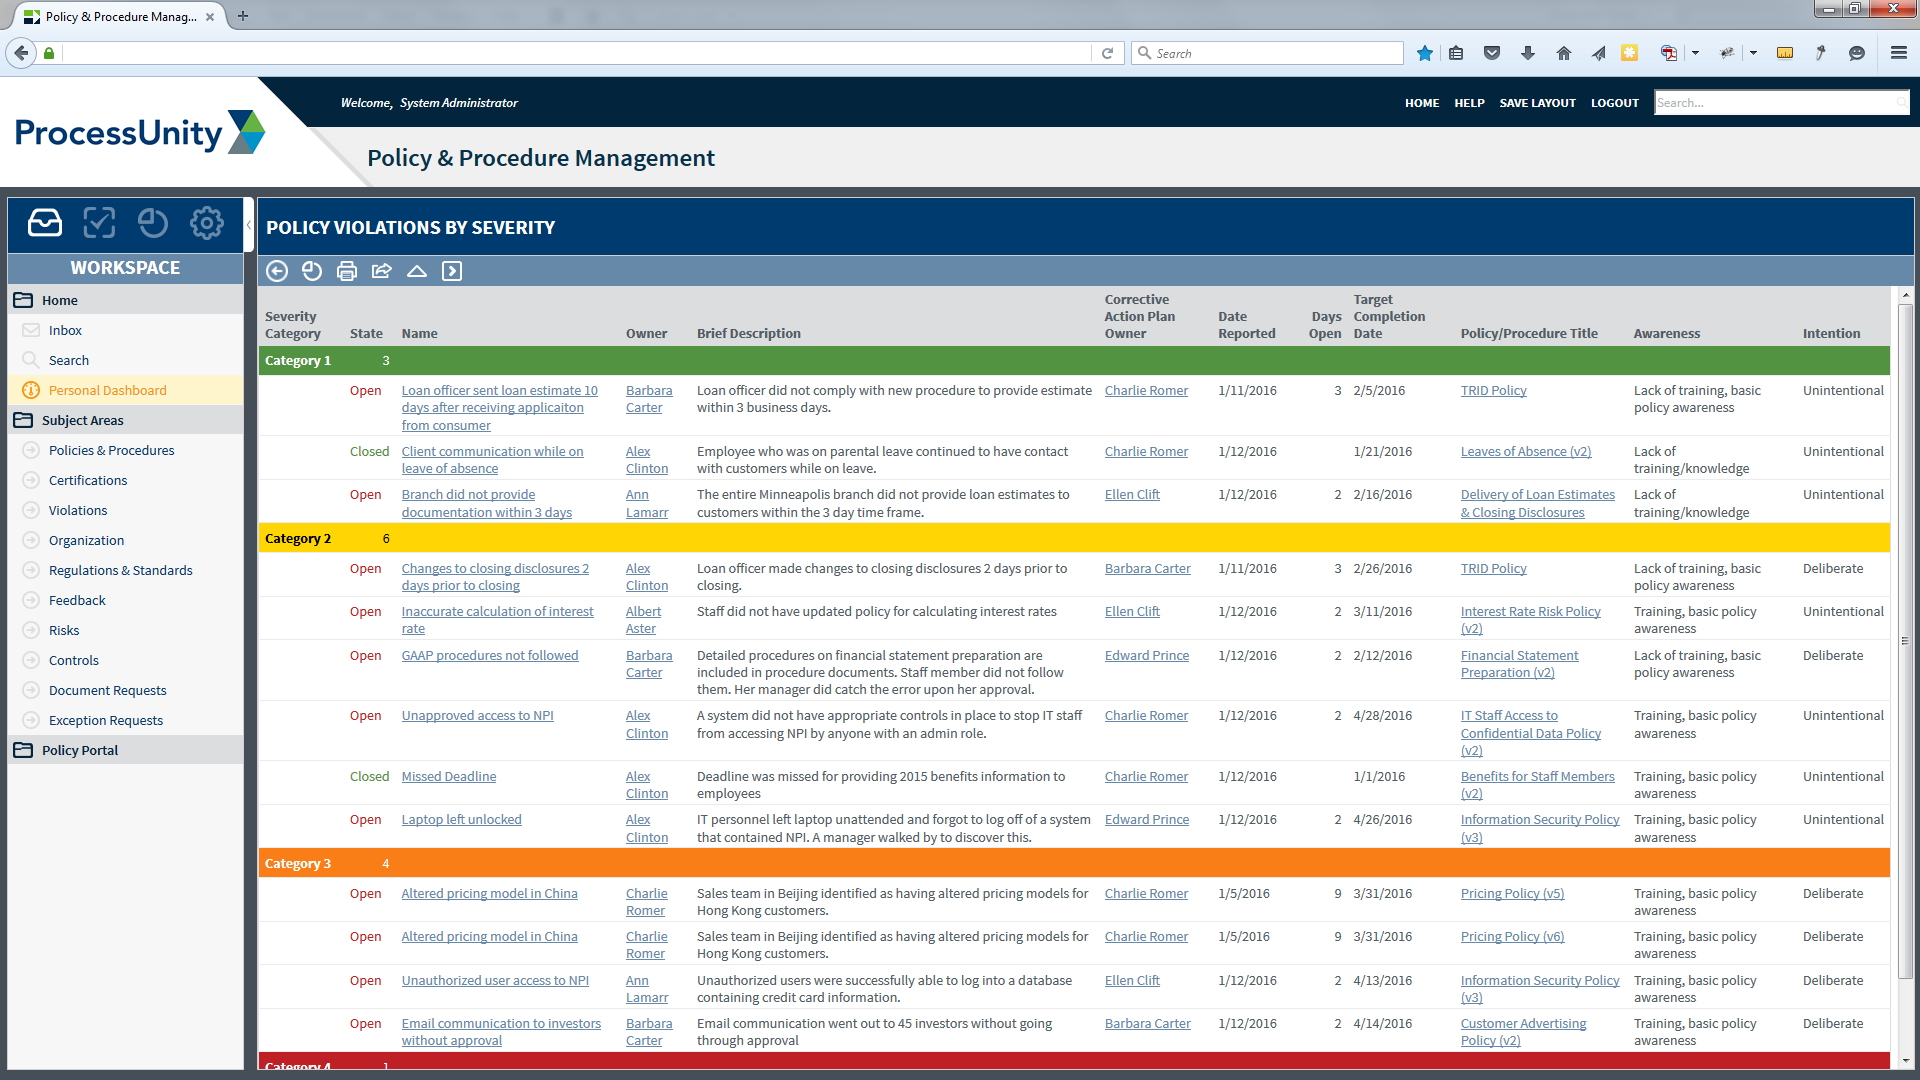 Interactive reports display policy violations by severity.